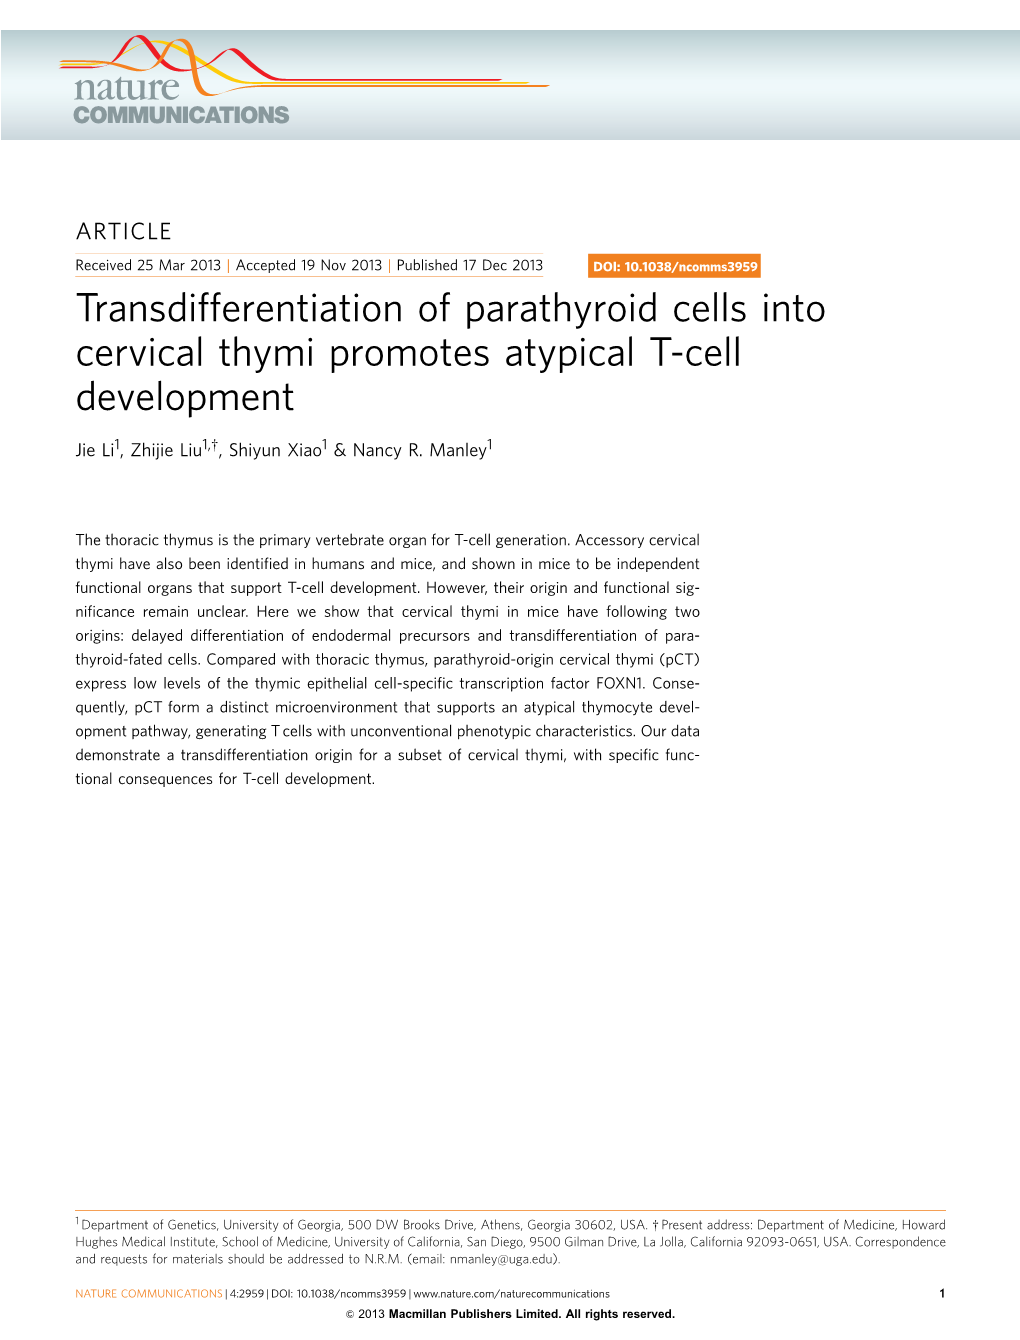 Transdifferentiation of Parathyroid Cells Into Cervical Thymi Promotes Atypical T-Cell Development